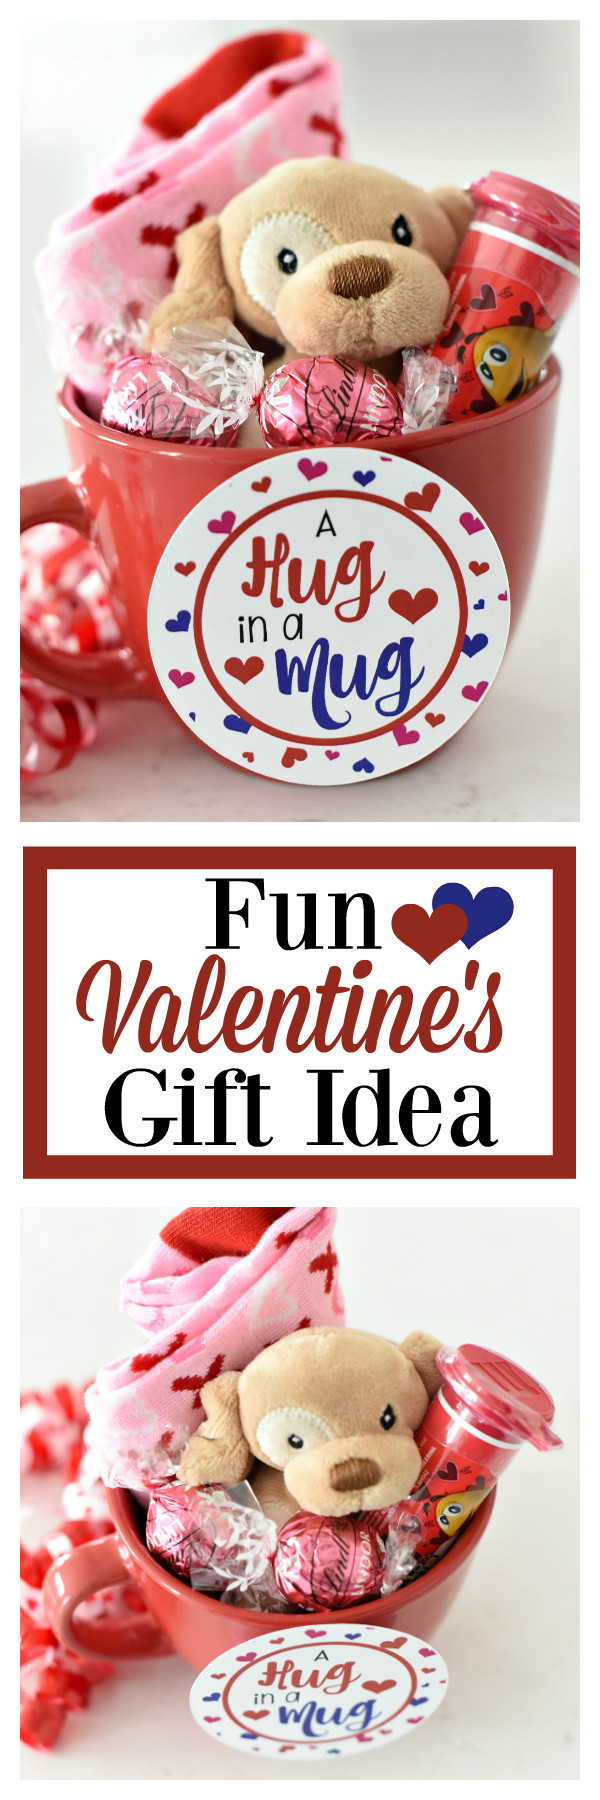 Valentine Gift Ideas For College Students
 Fun Valentines Gift Idea for Kids – Fun Squared